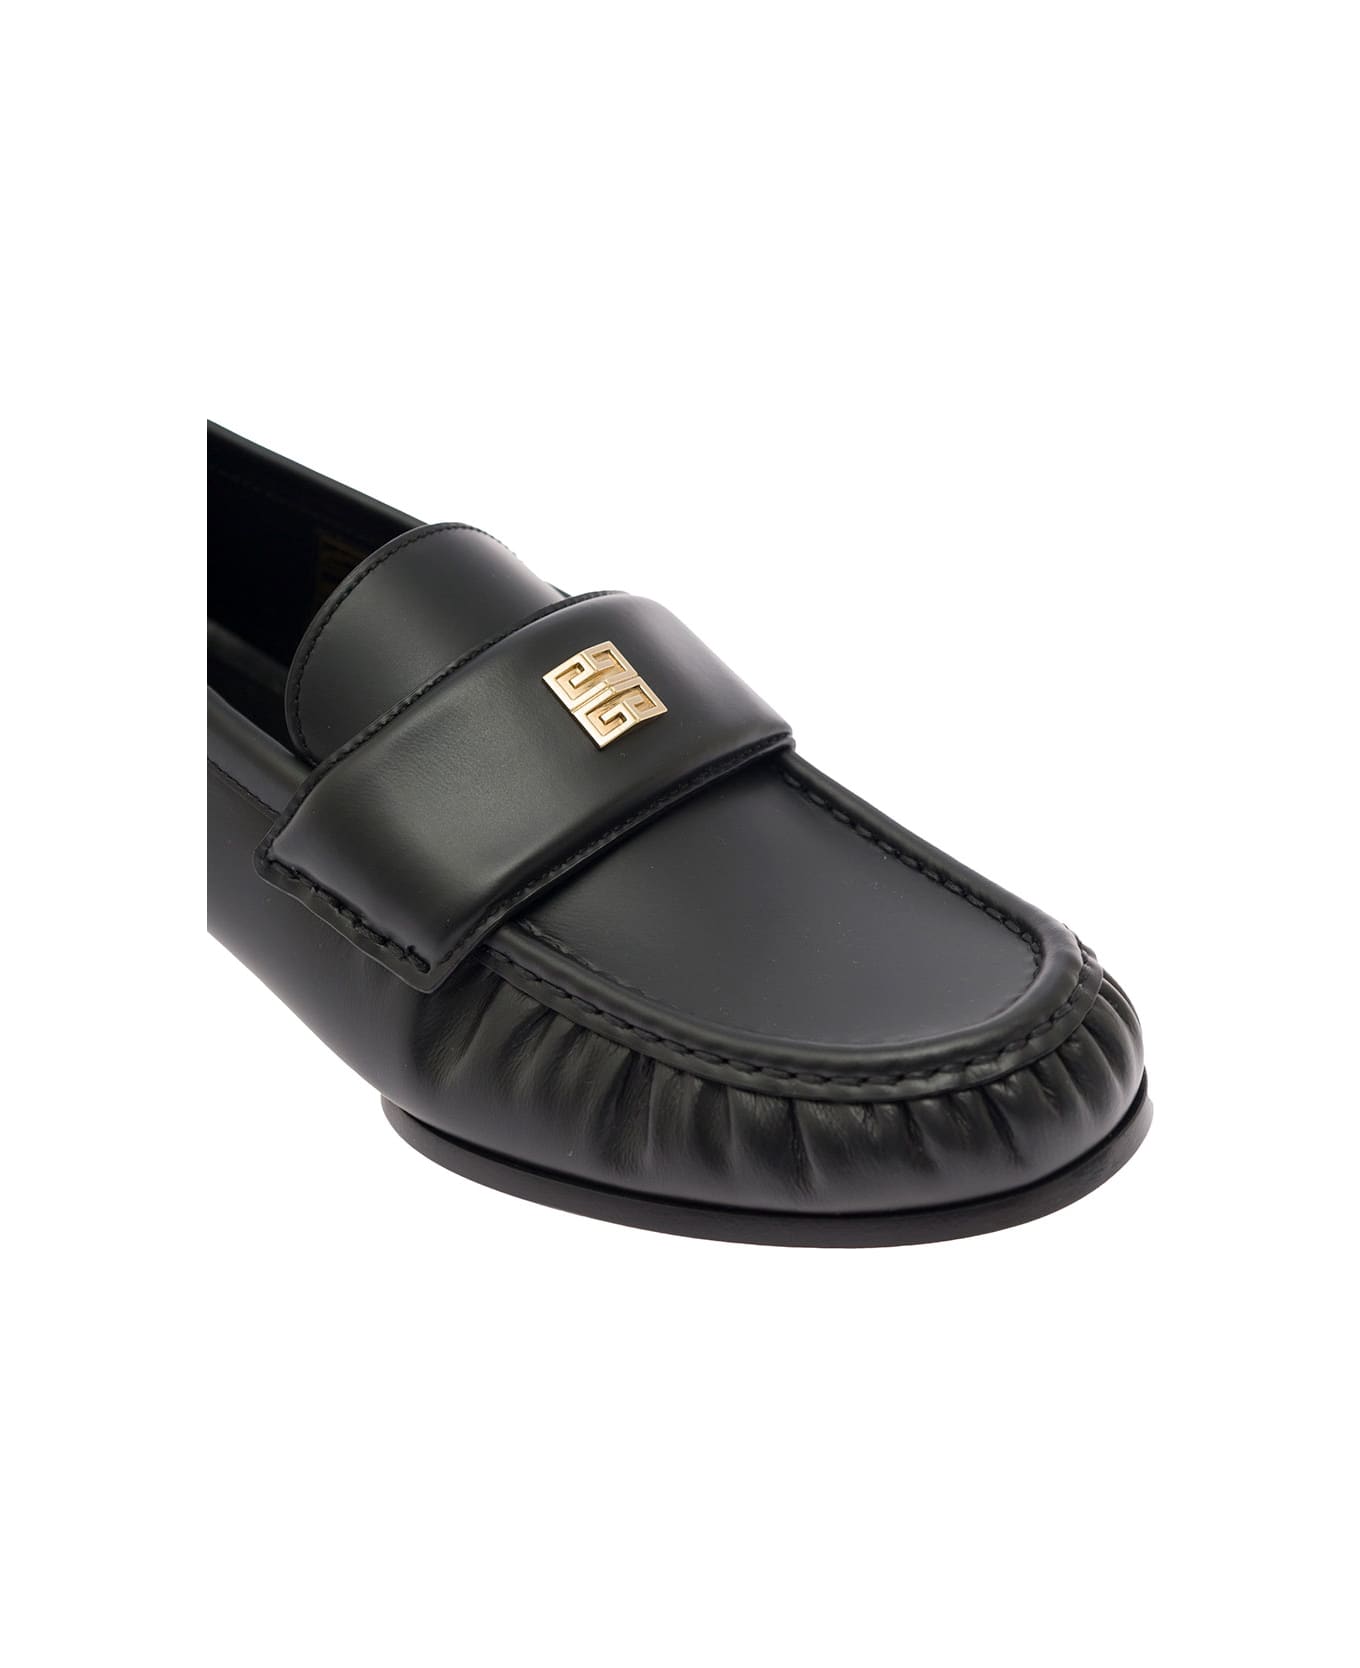 Givenchy Black Loafers With Logo Detail In Smooth Leather Woman - BLACK